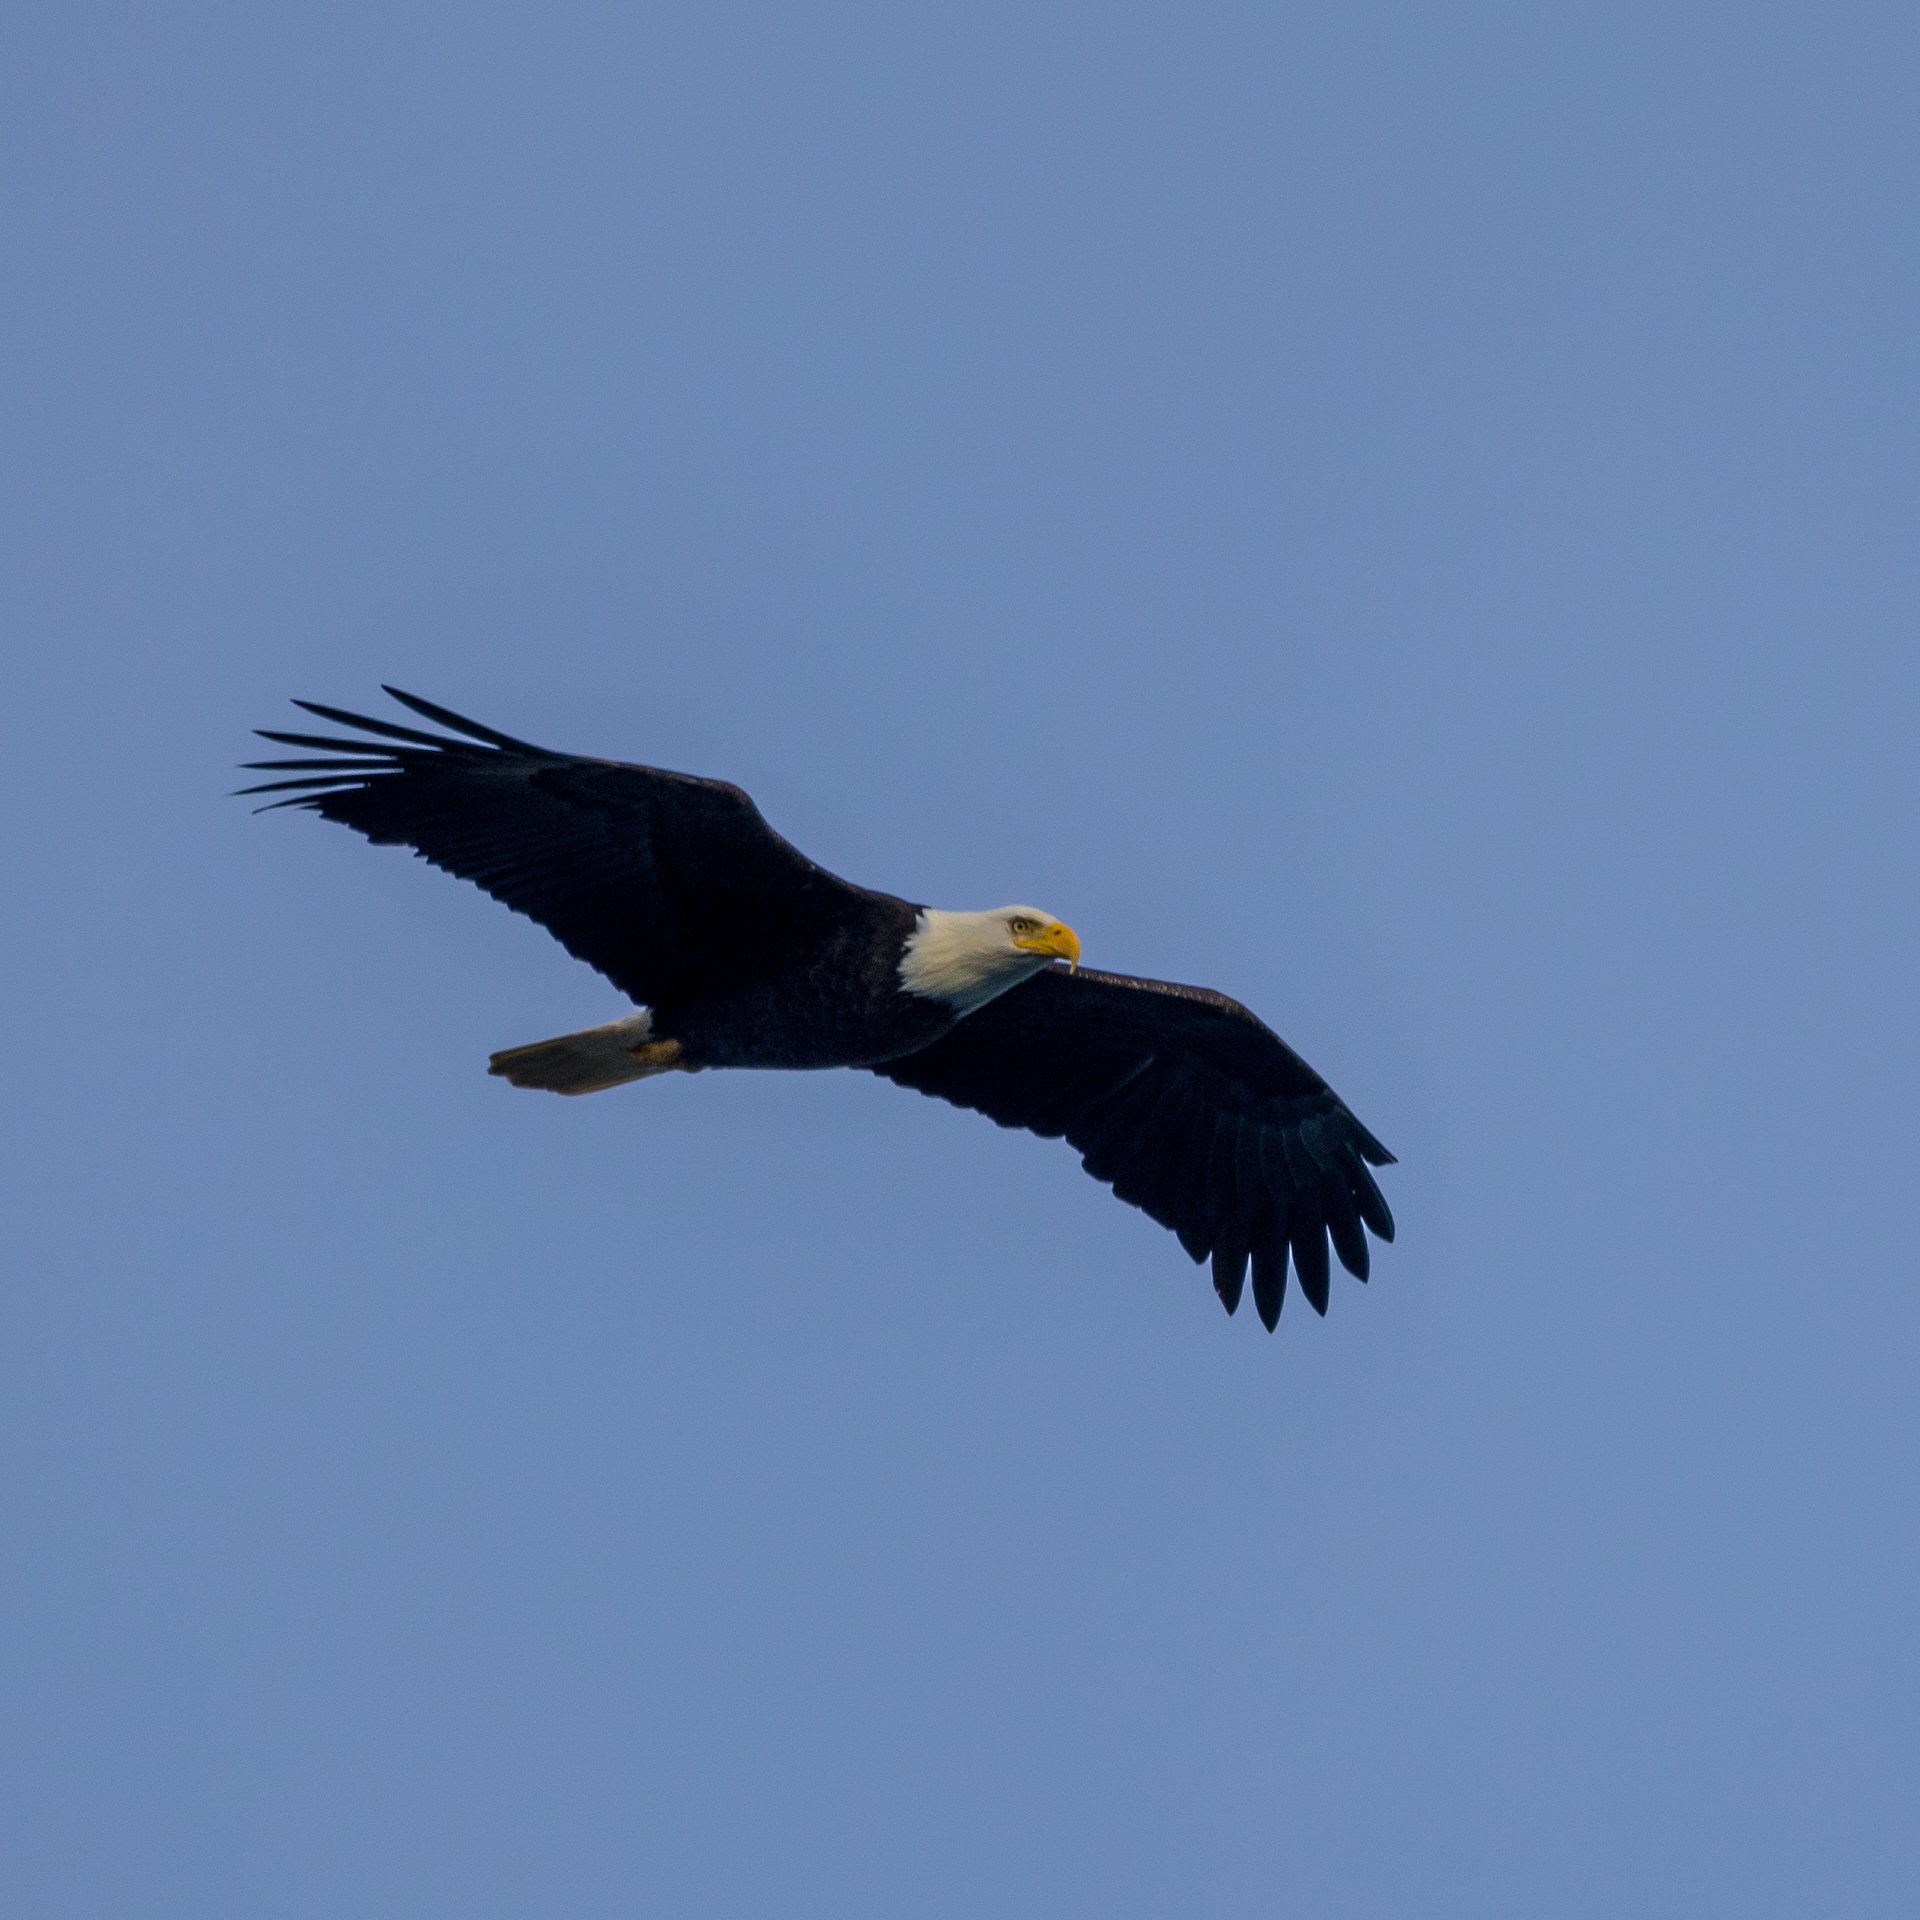  There were a lot of bald eagles flying around. 